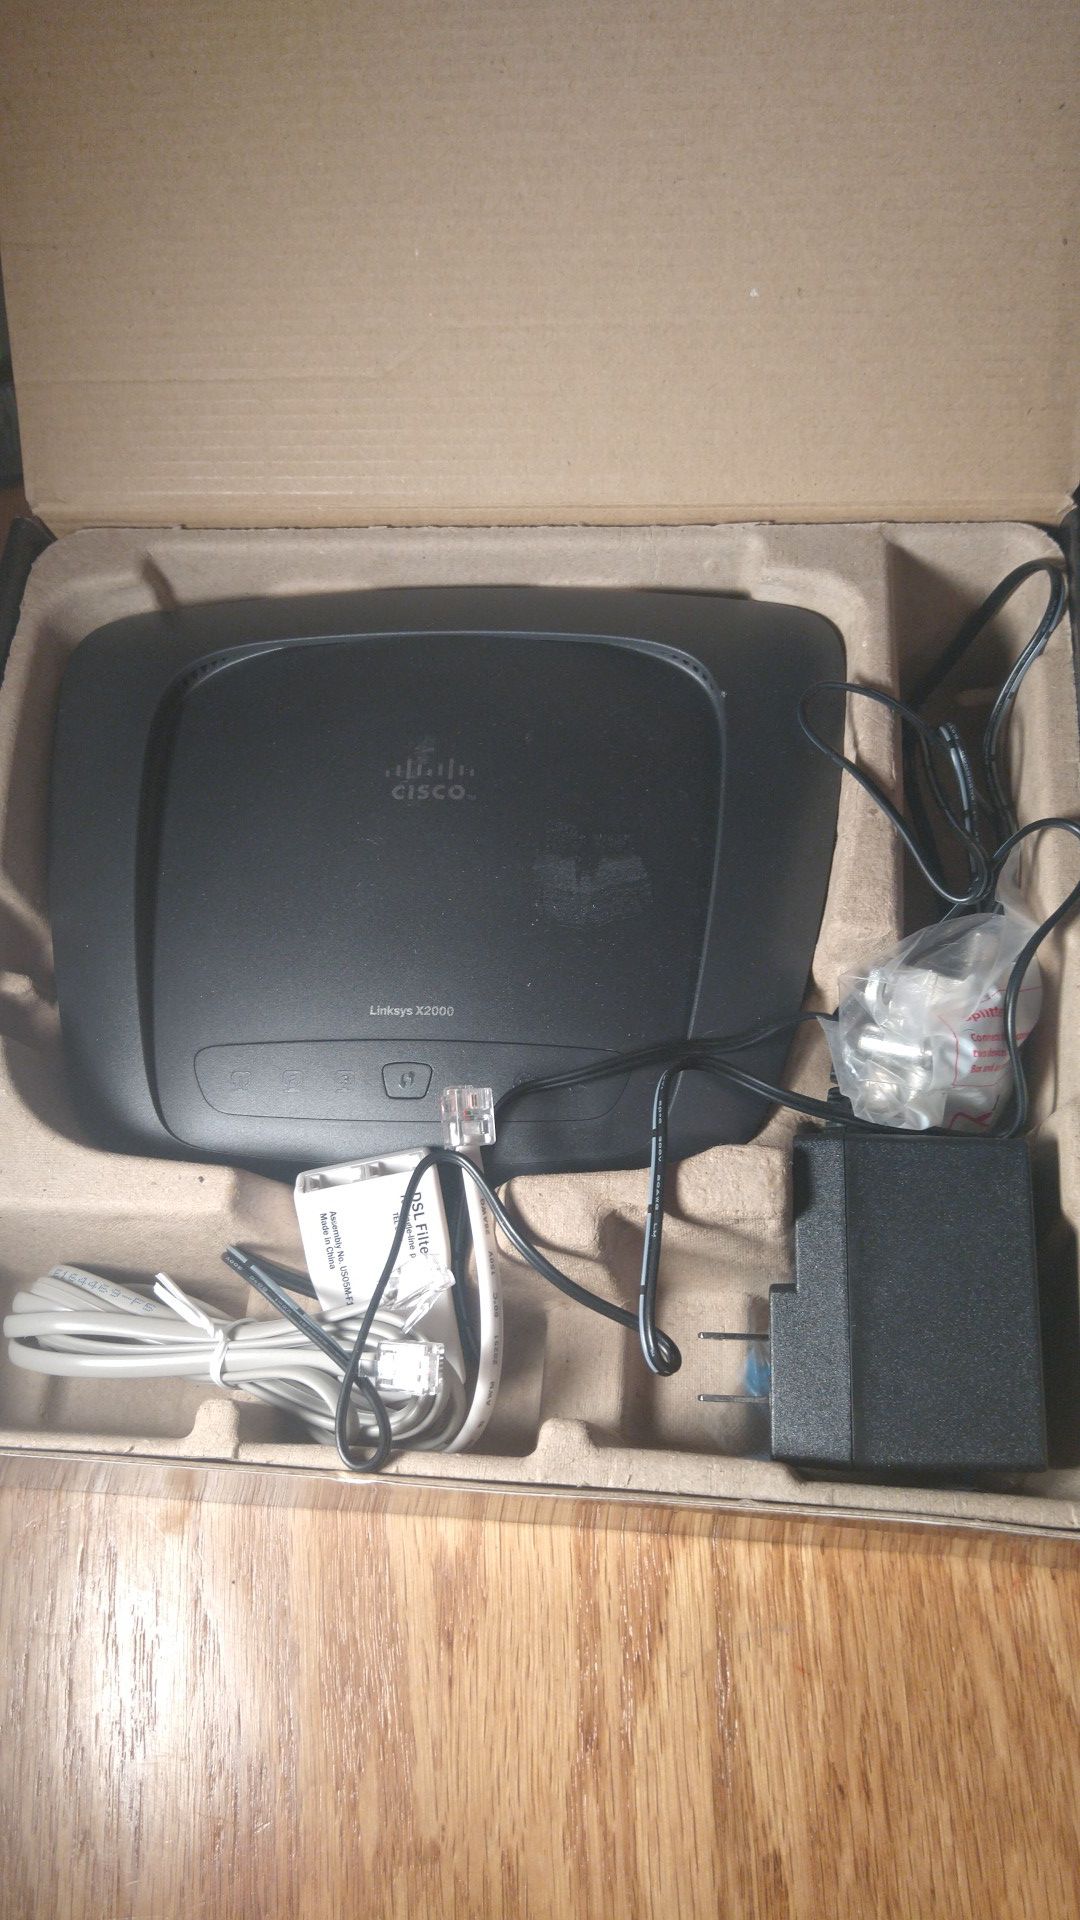 Linksys wireless router x a 2000